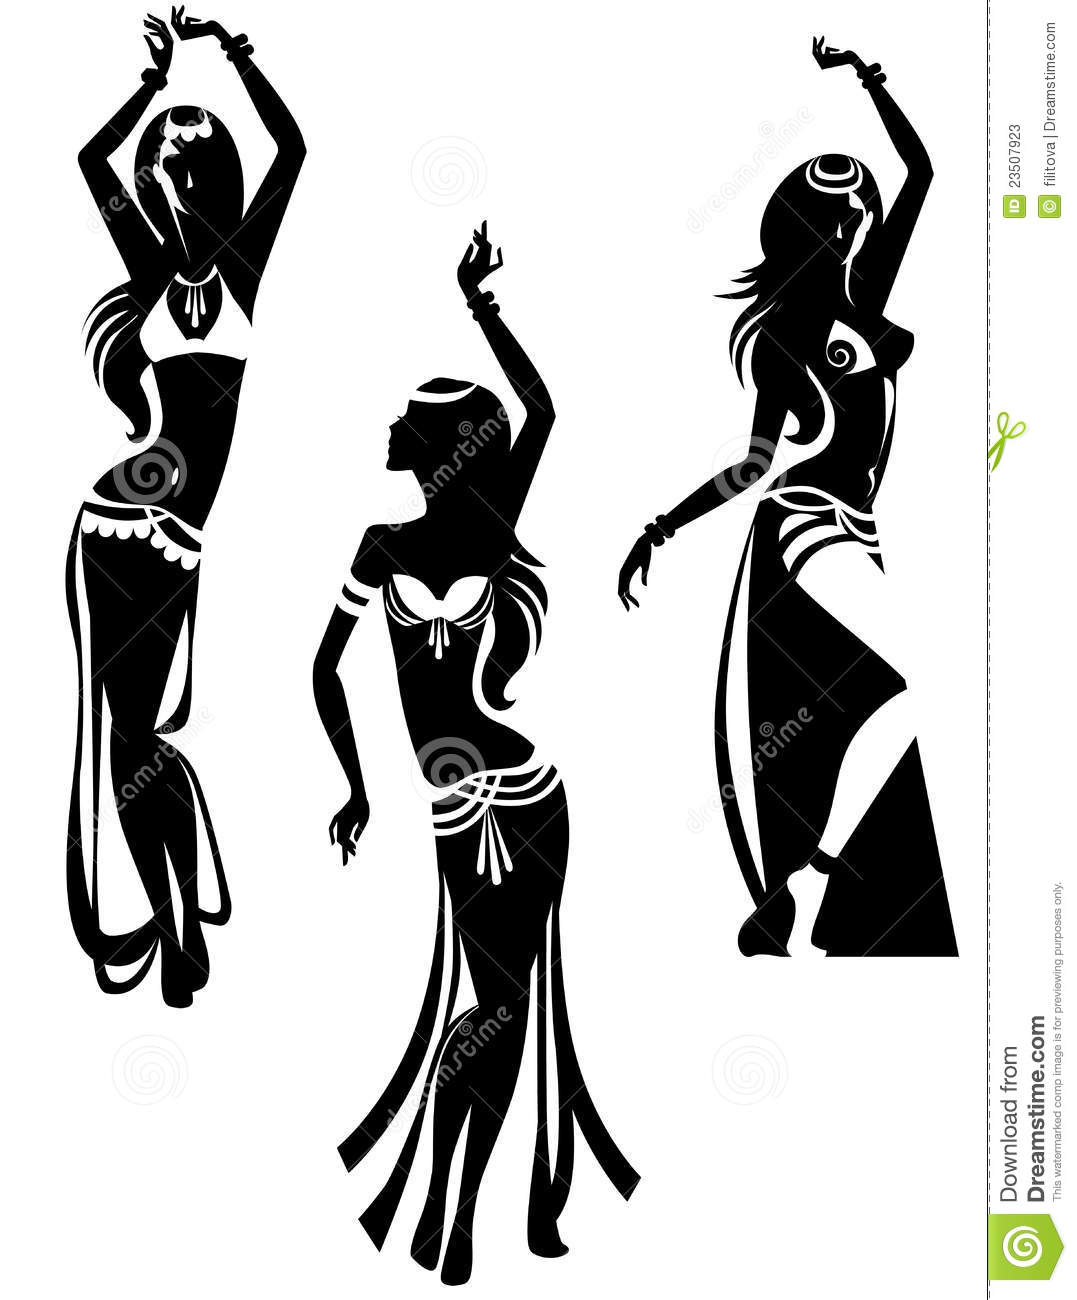 Vector Illustration Of A Silhouette Of Woman Dancing Belly Dance